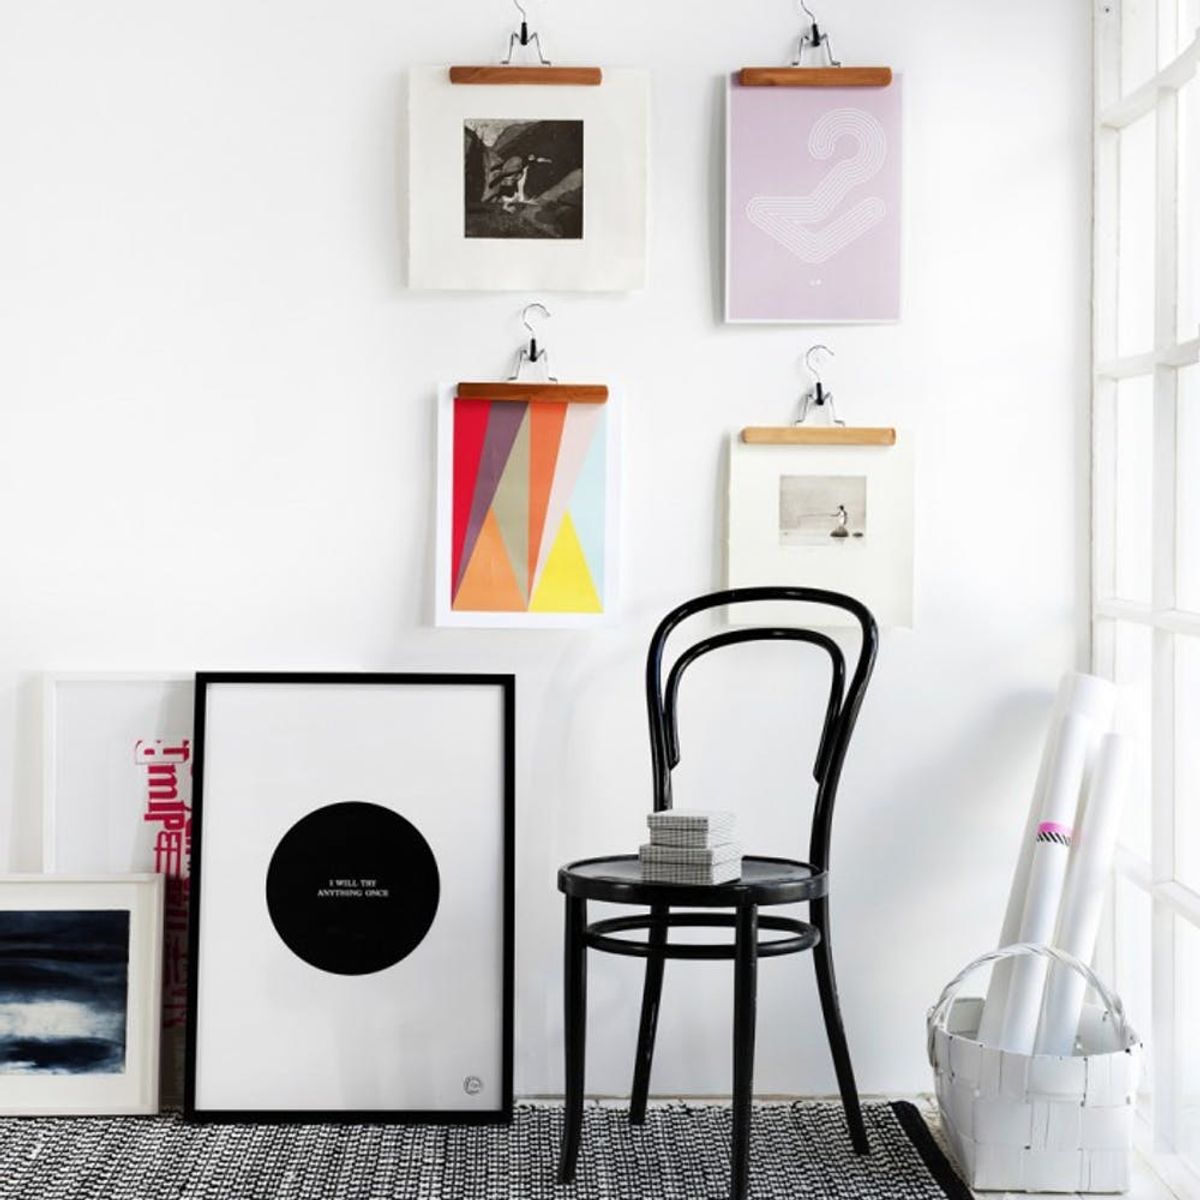 10 Unique Wall Art Display Ideas That Aren’t Another Gallery Wall